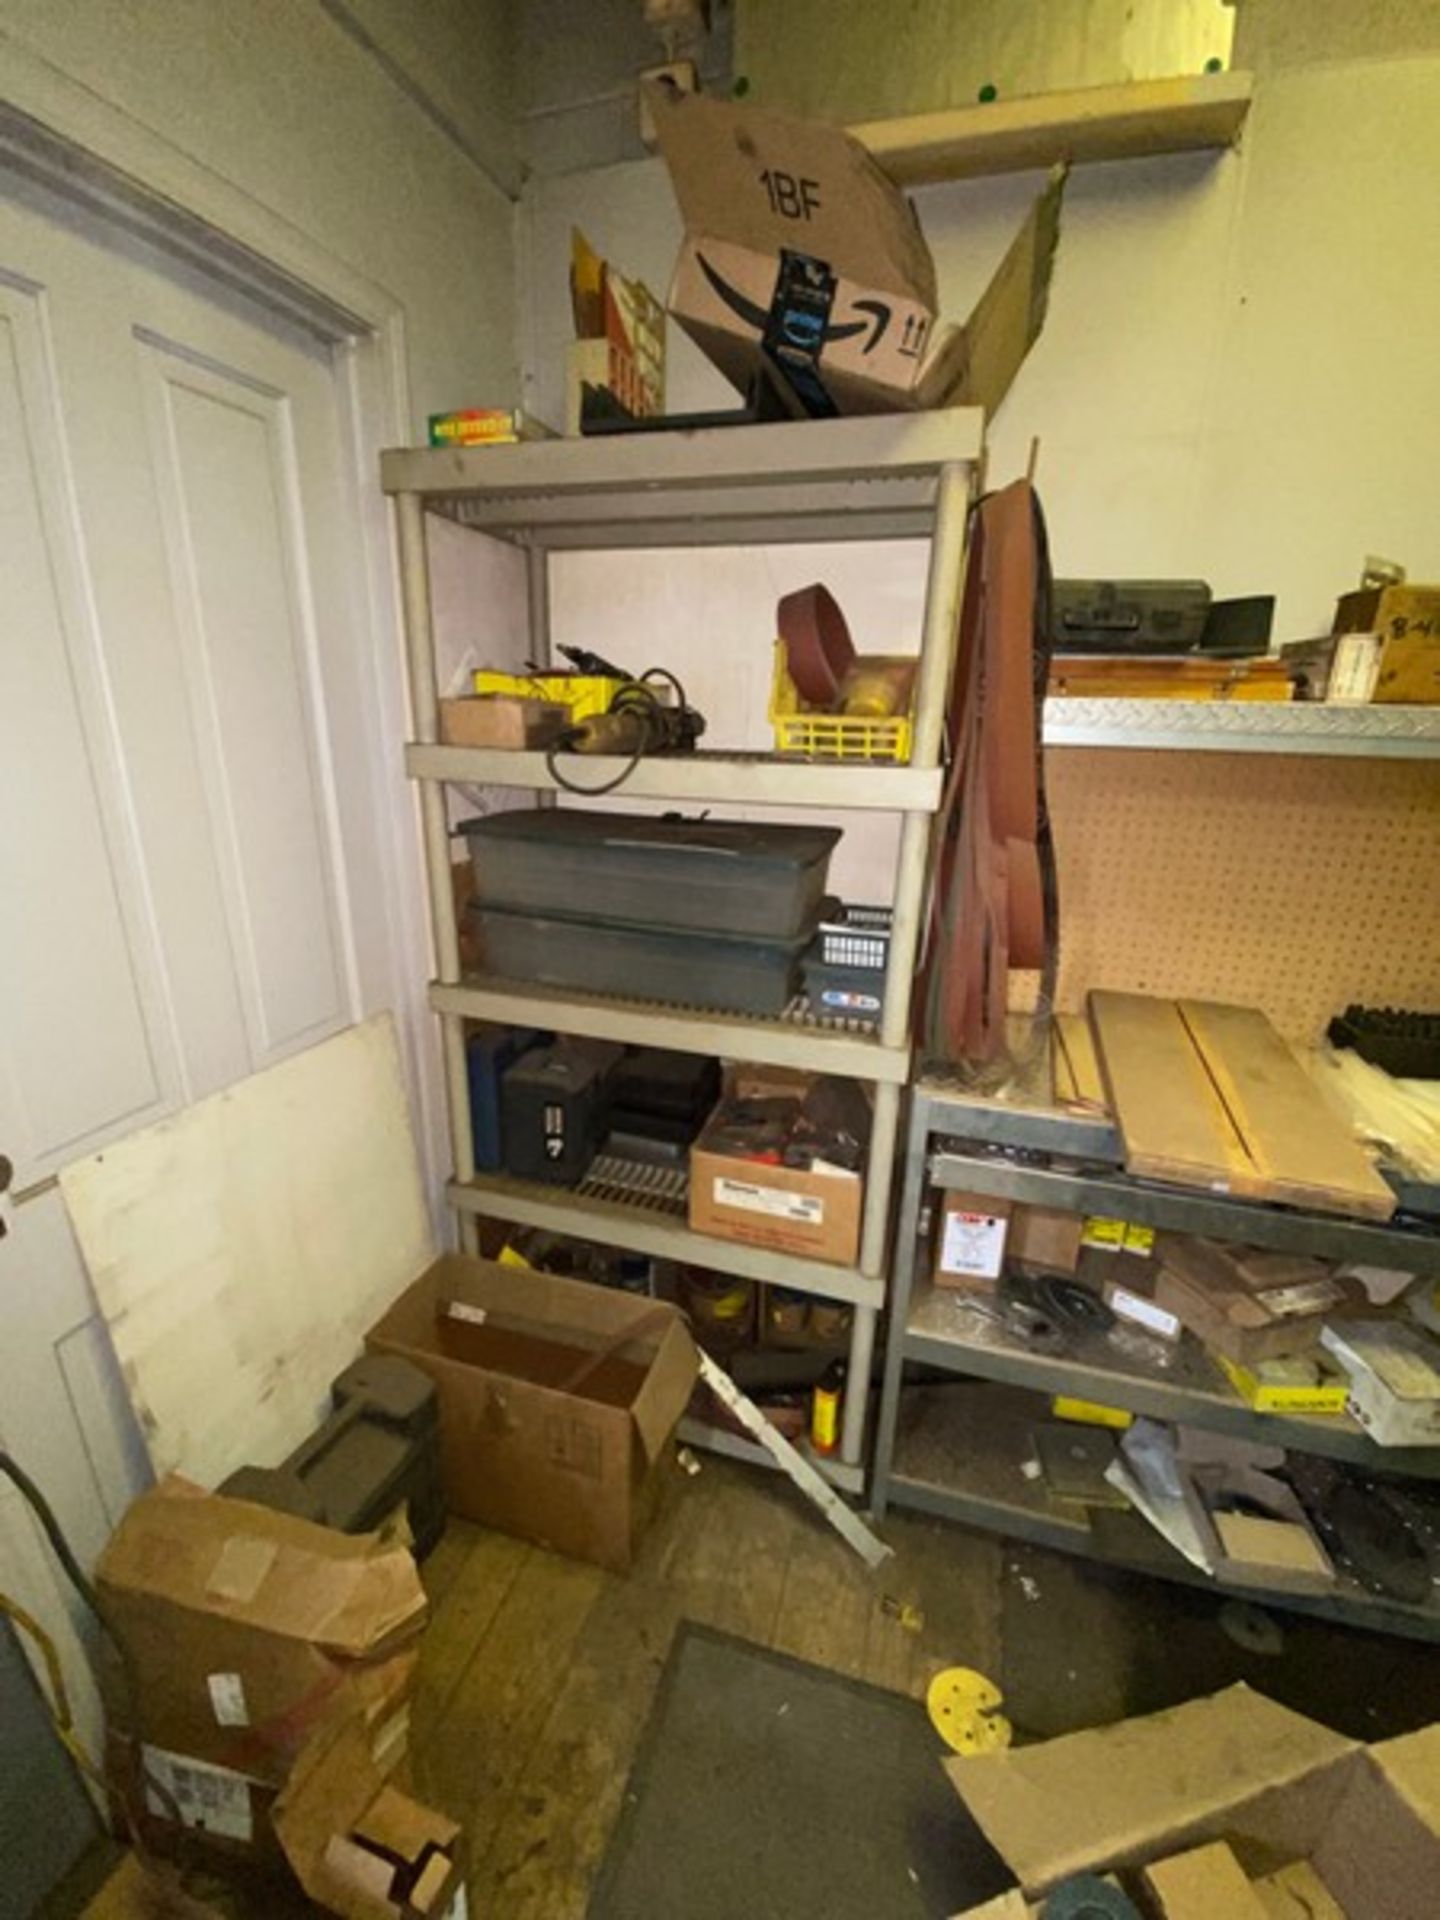 Contents of Shelving Units & Wall, Includes Belting & Other Parts (LOCATED IN CORRY, PA) - Image 2 of 4